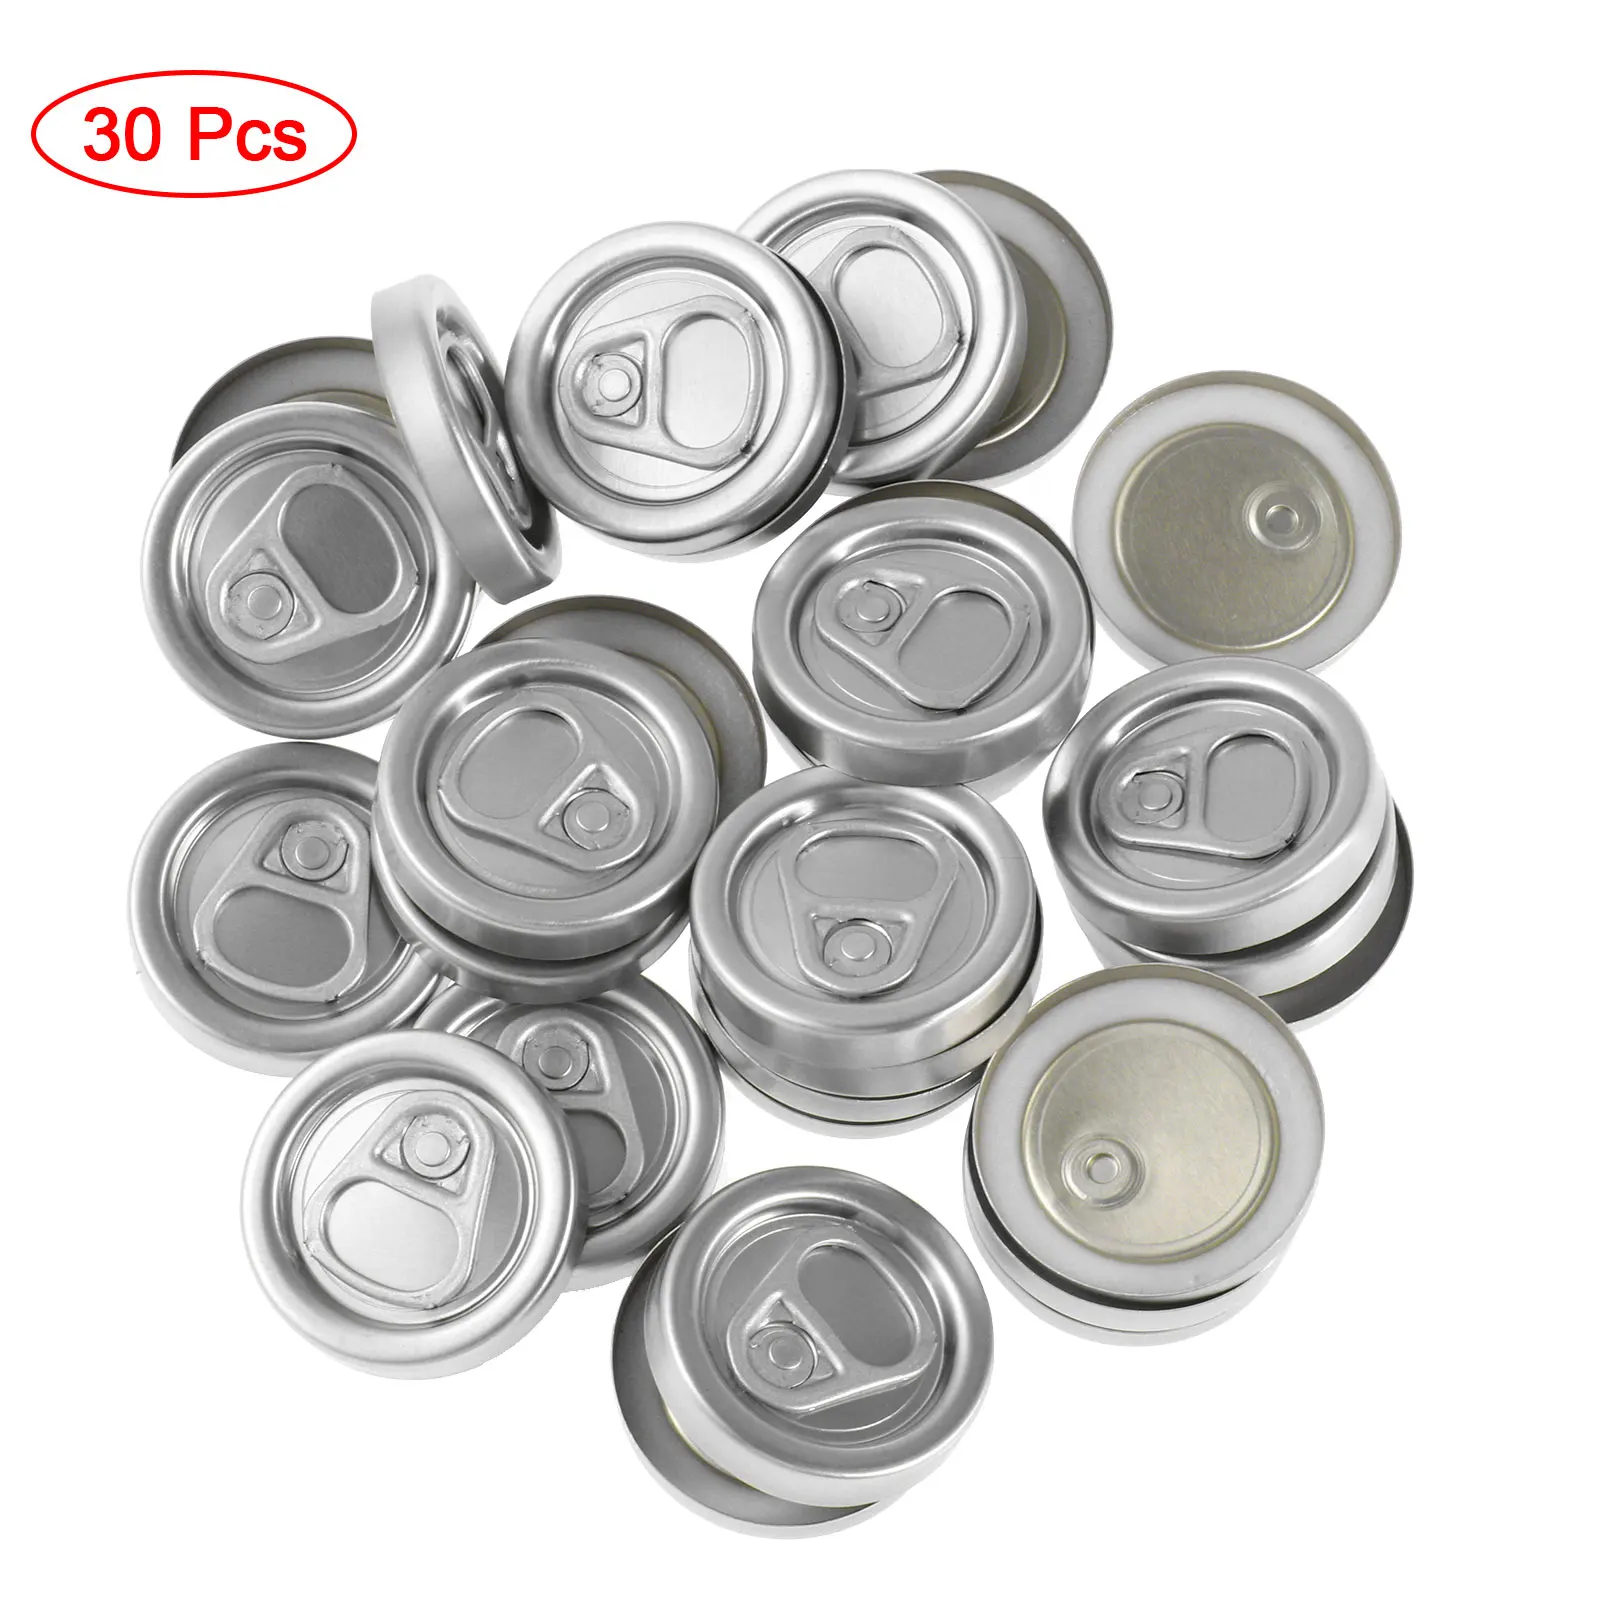 30Pcs Water Bottle Lids Pull Ring Lid Top Beer Jar Caps Aluminum Home Brewing Storage Covers Pull Stopper Cover for Beer Canning